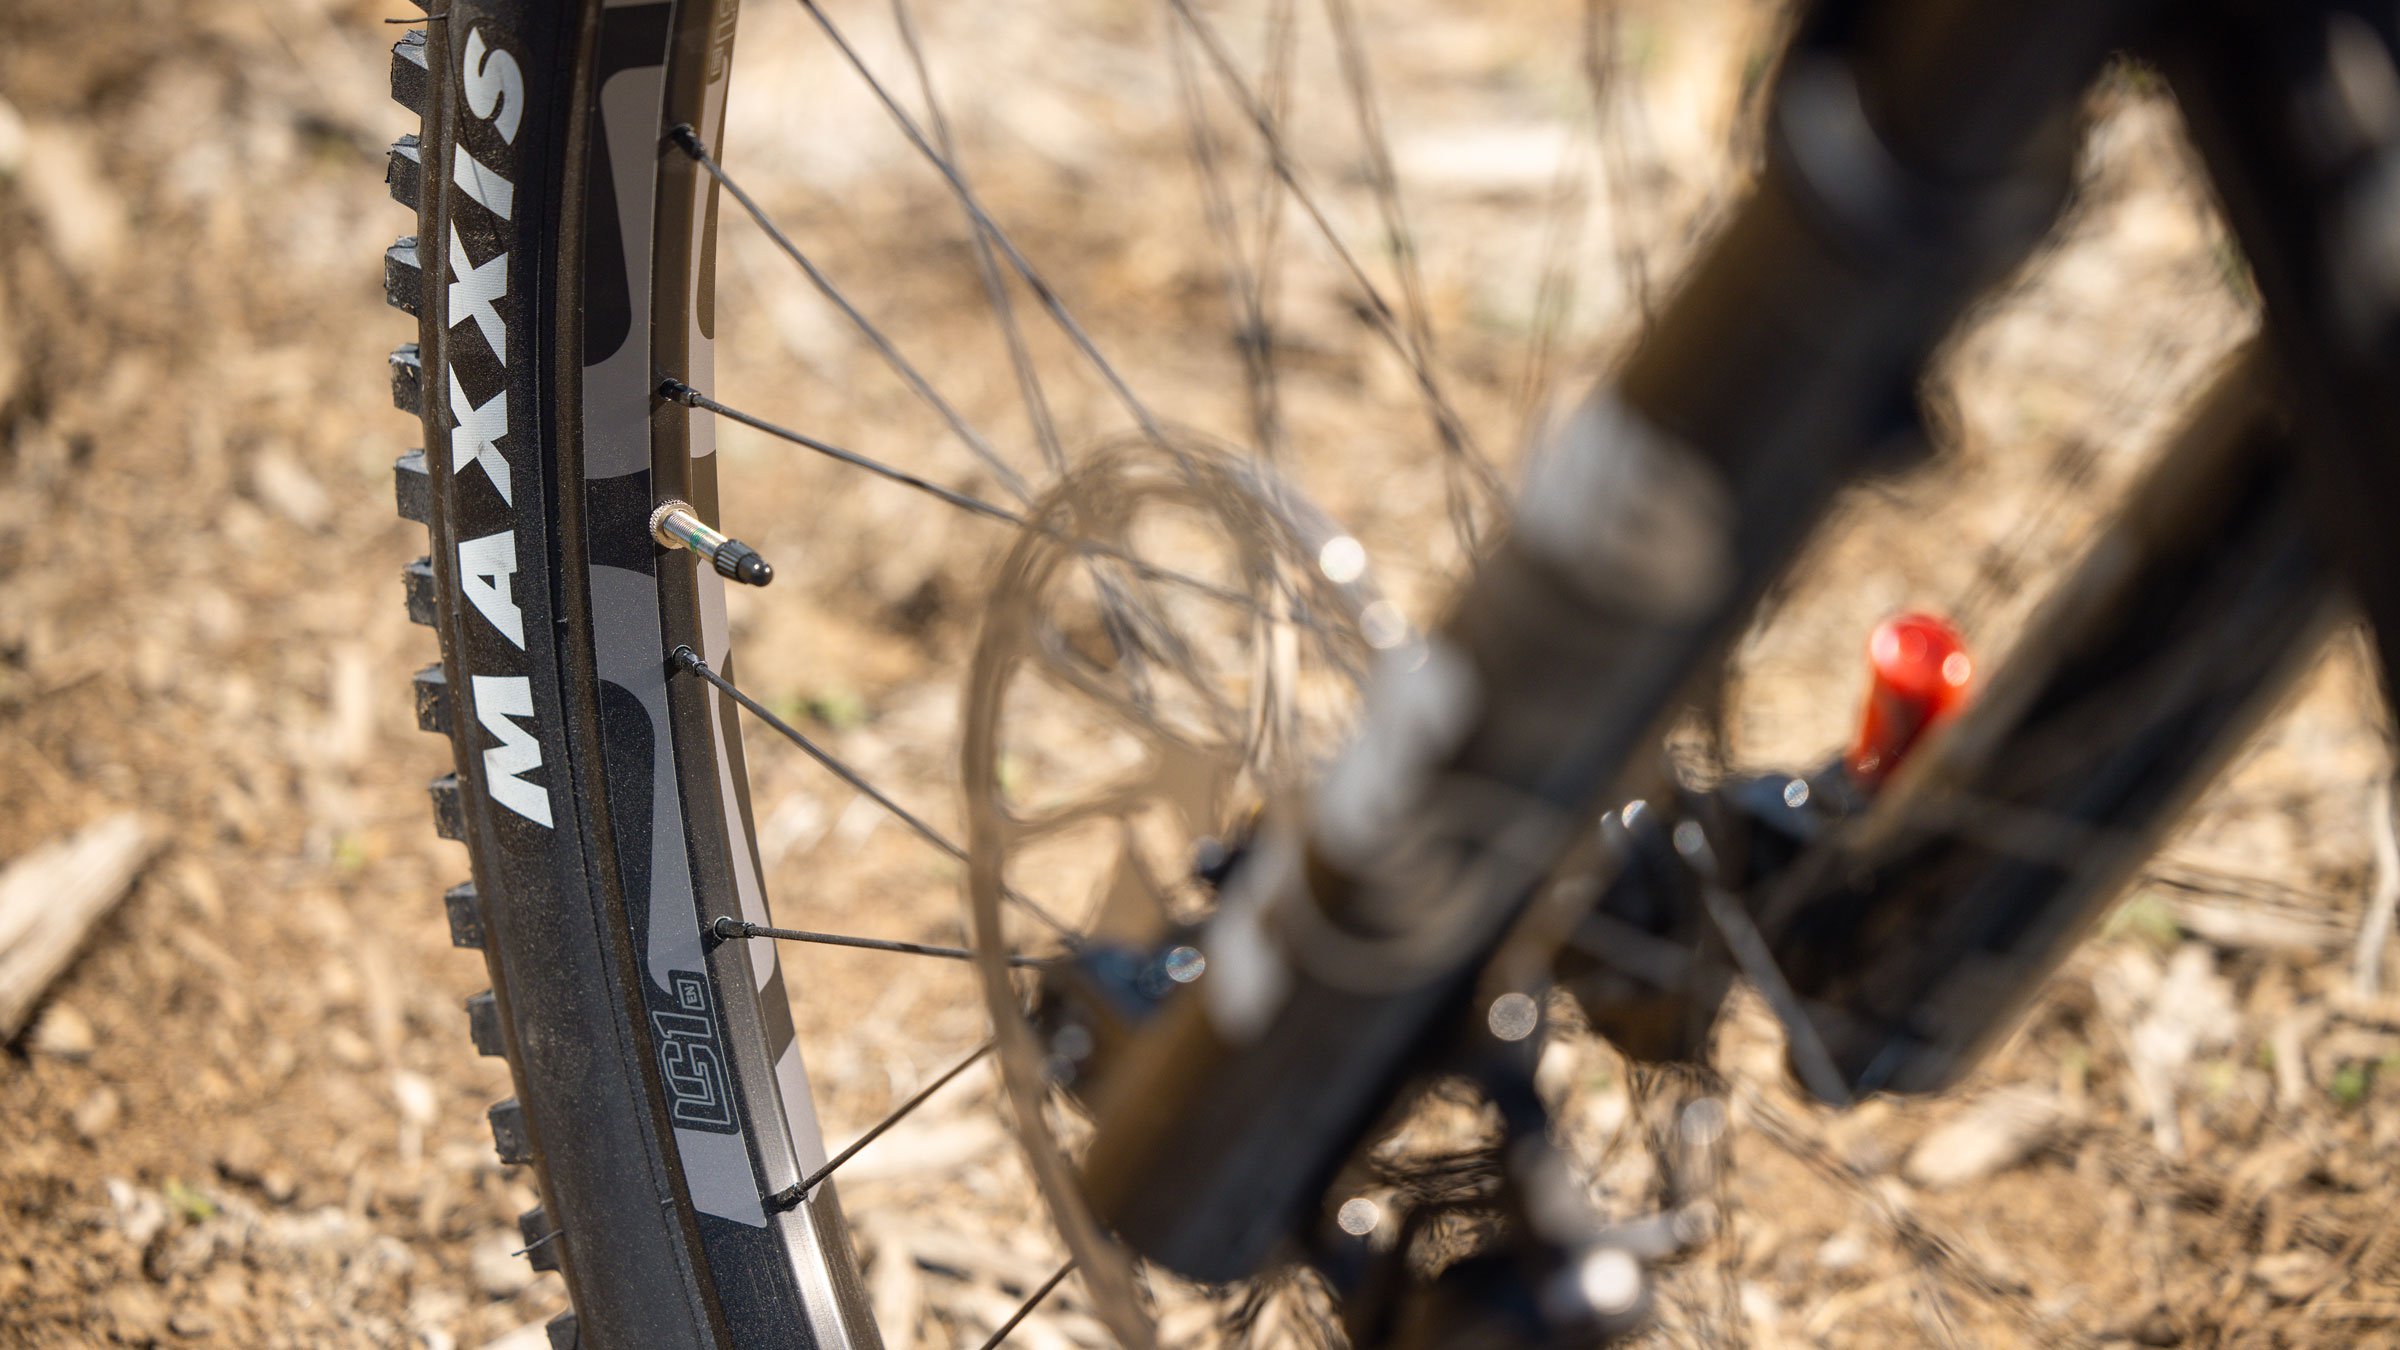 Close up of bike wheels in the dirt